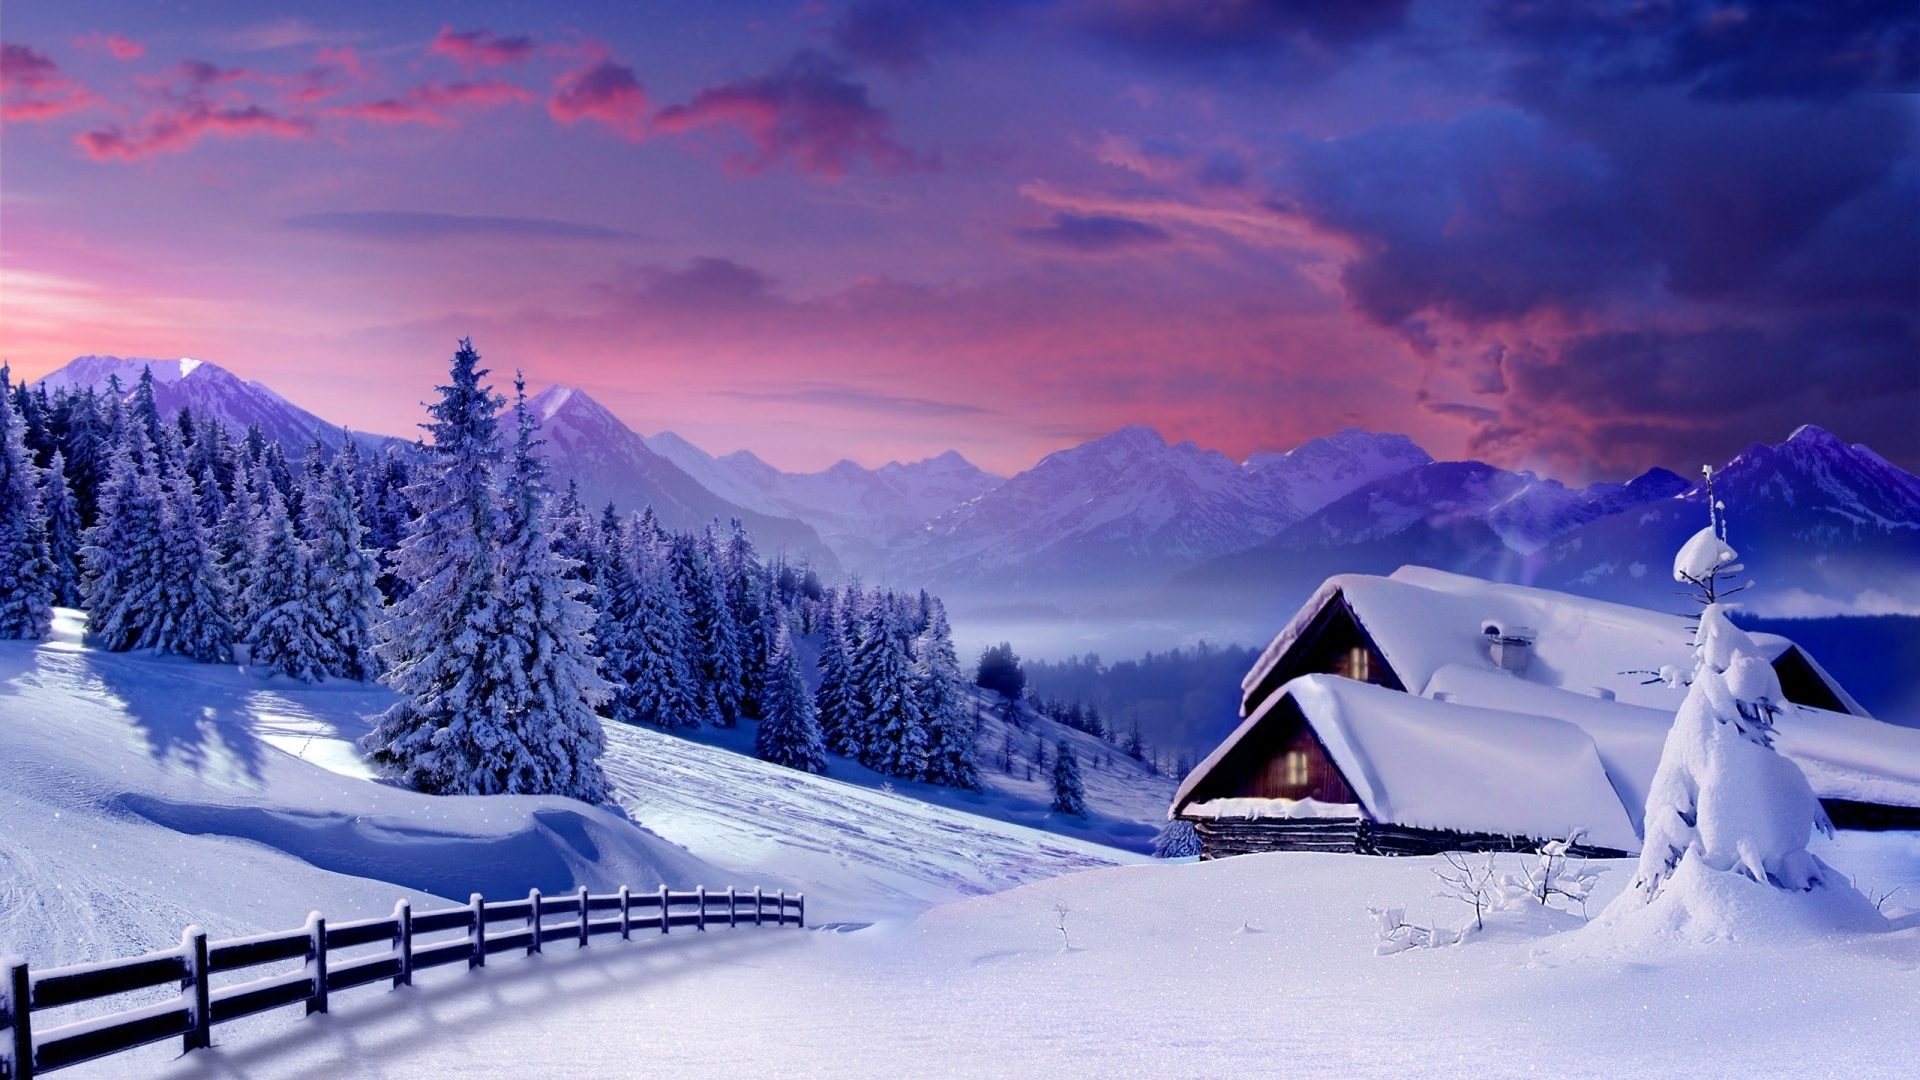 Winter: Clouds Cottages Pink Mountain Landscape Cabins Nature Sunset ...